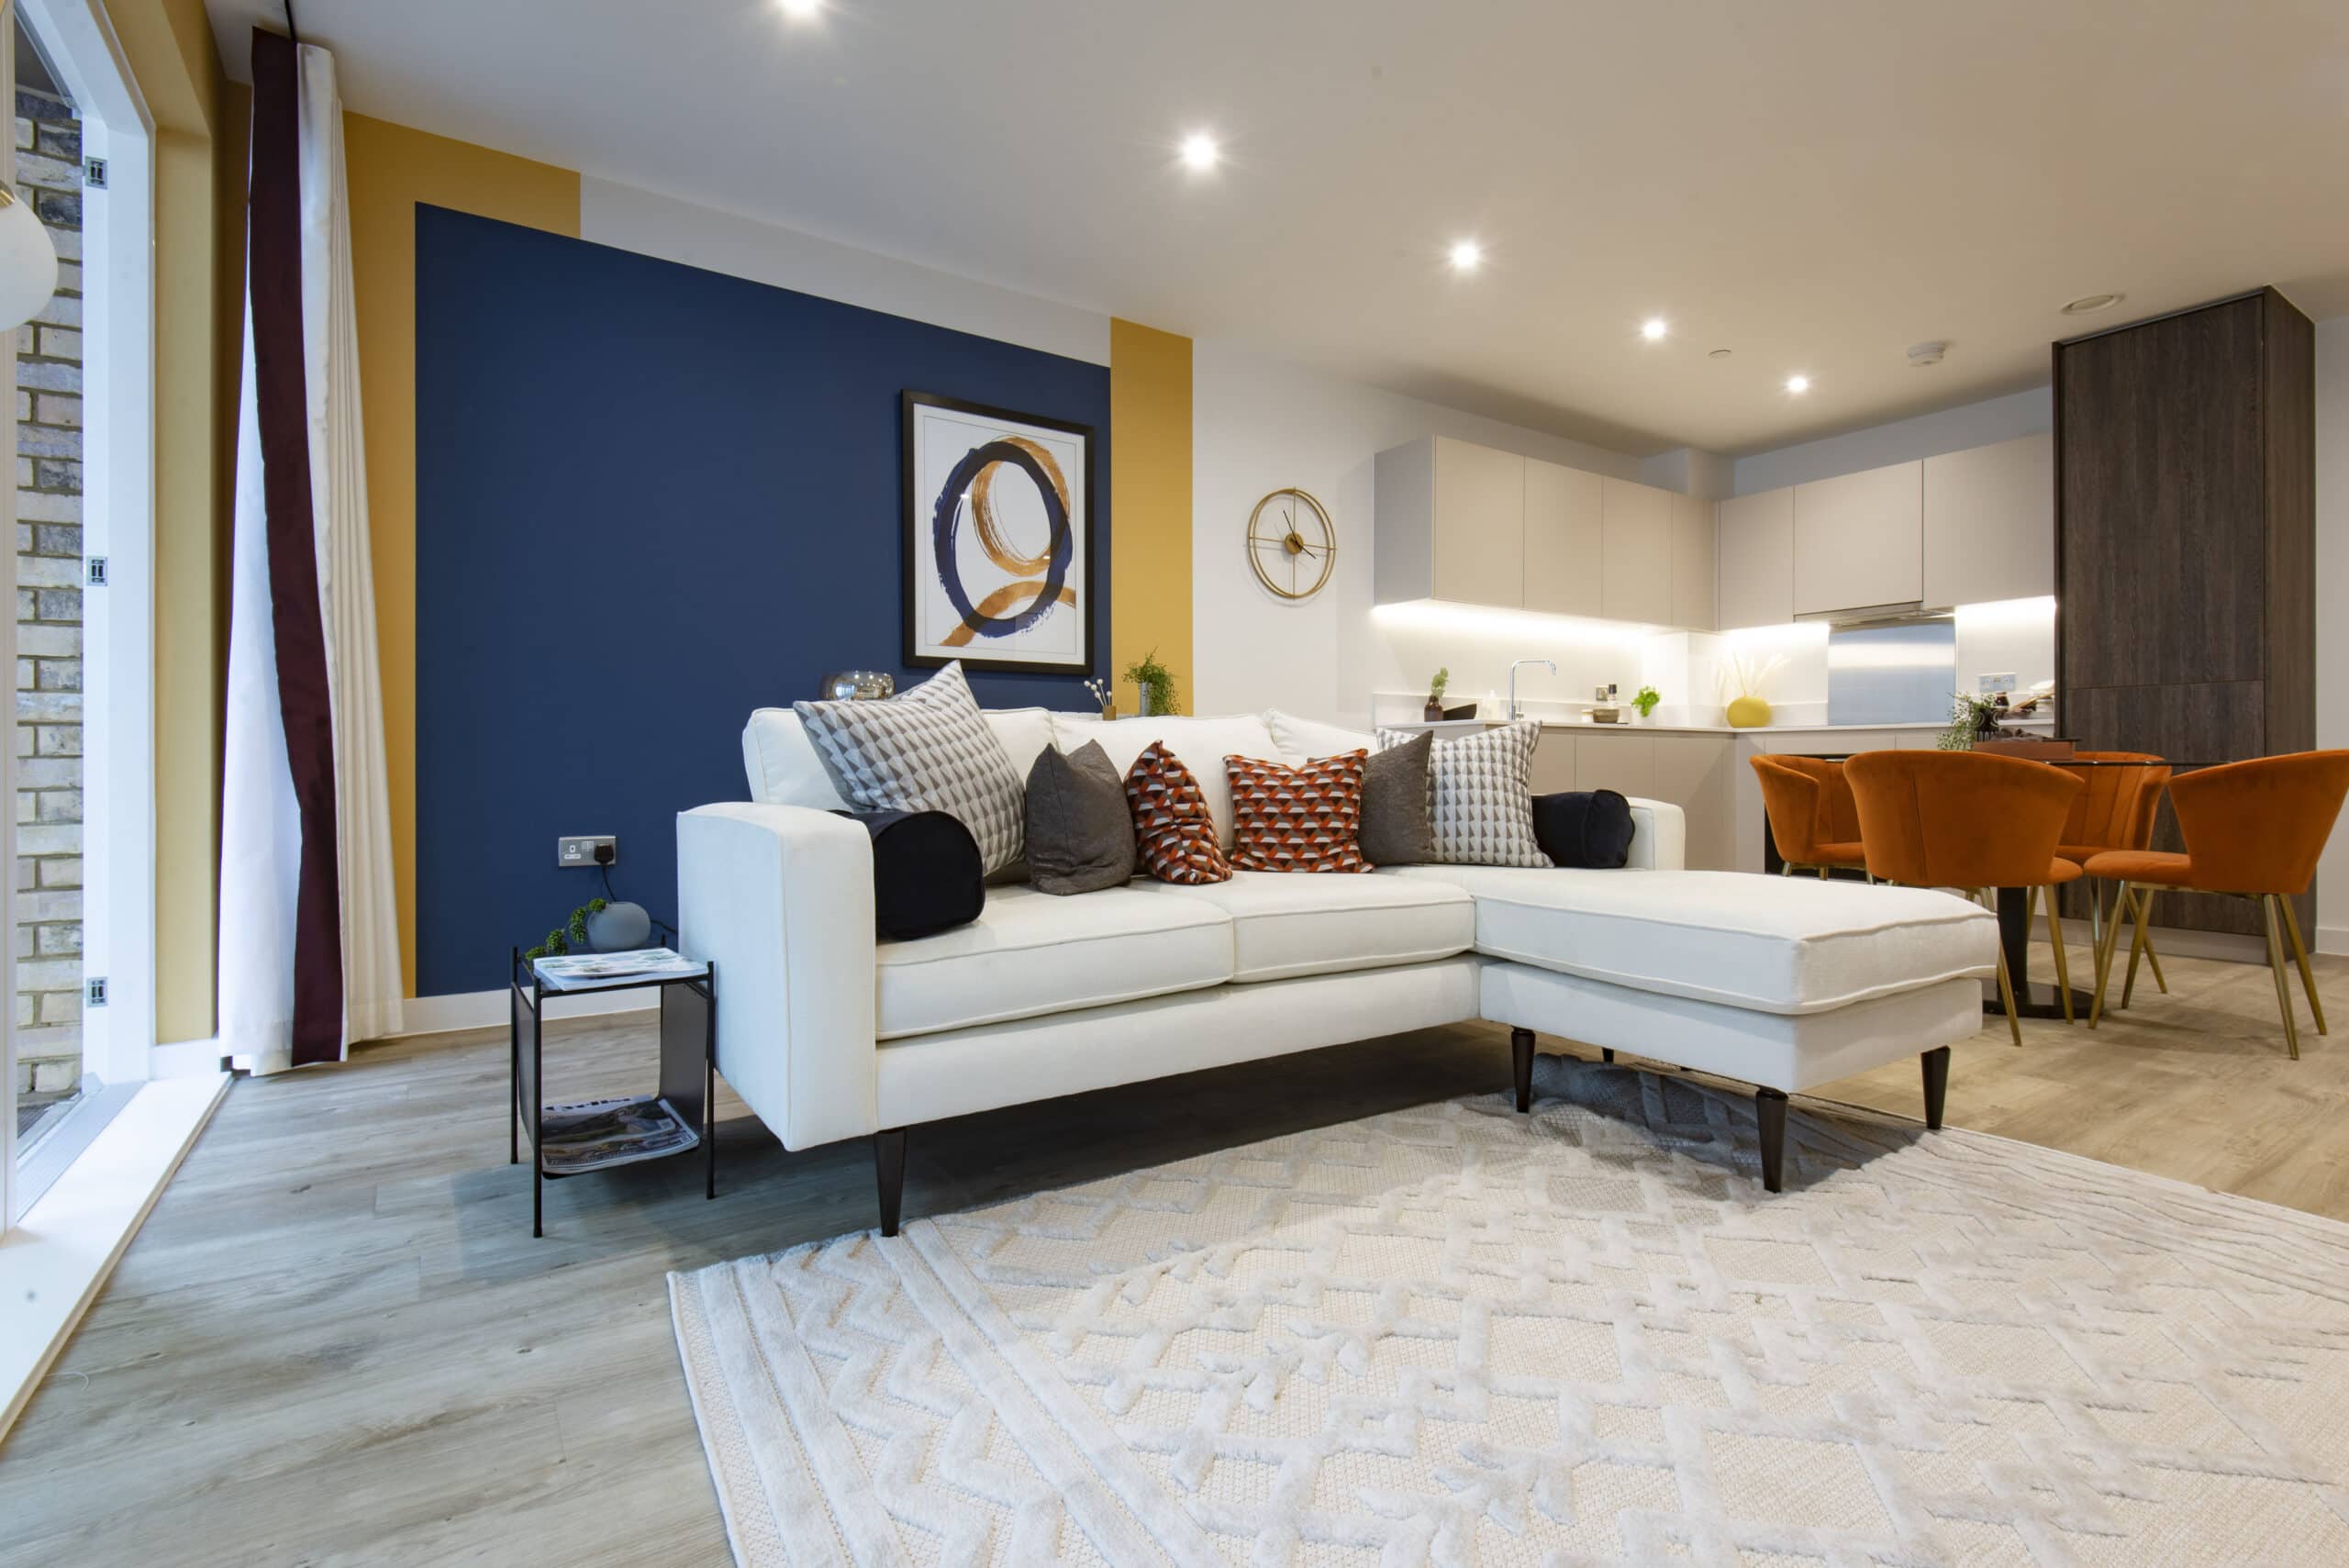 Internal photography of L&Q at Kidbrooke Village - Shared Ownership homes available on Share to Buy